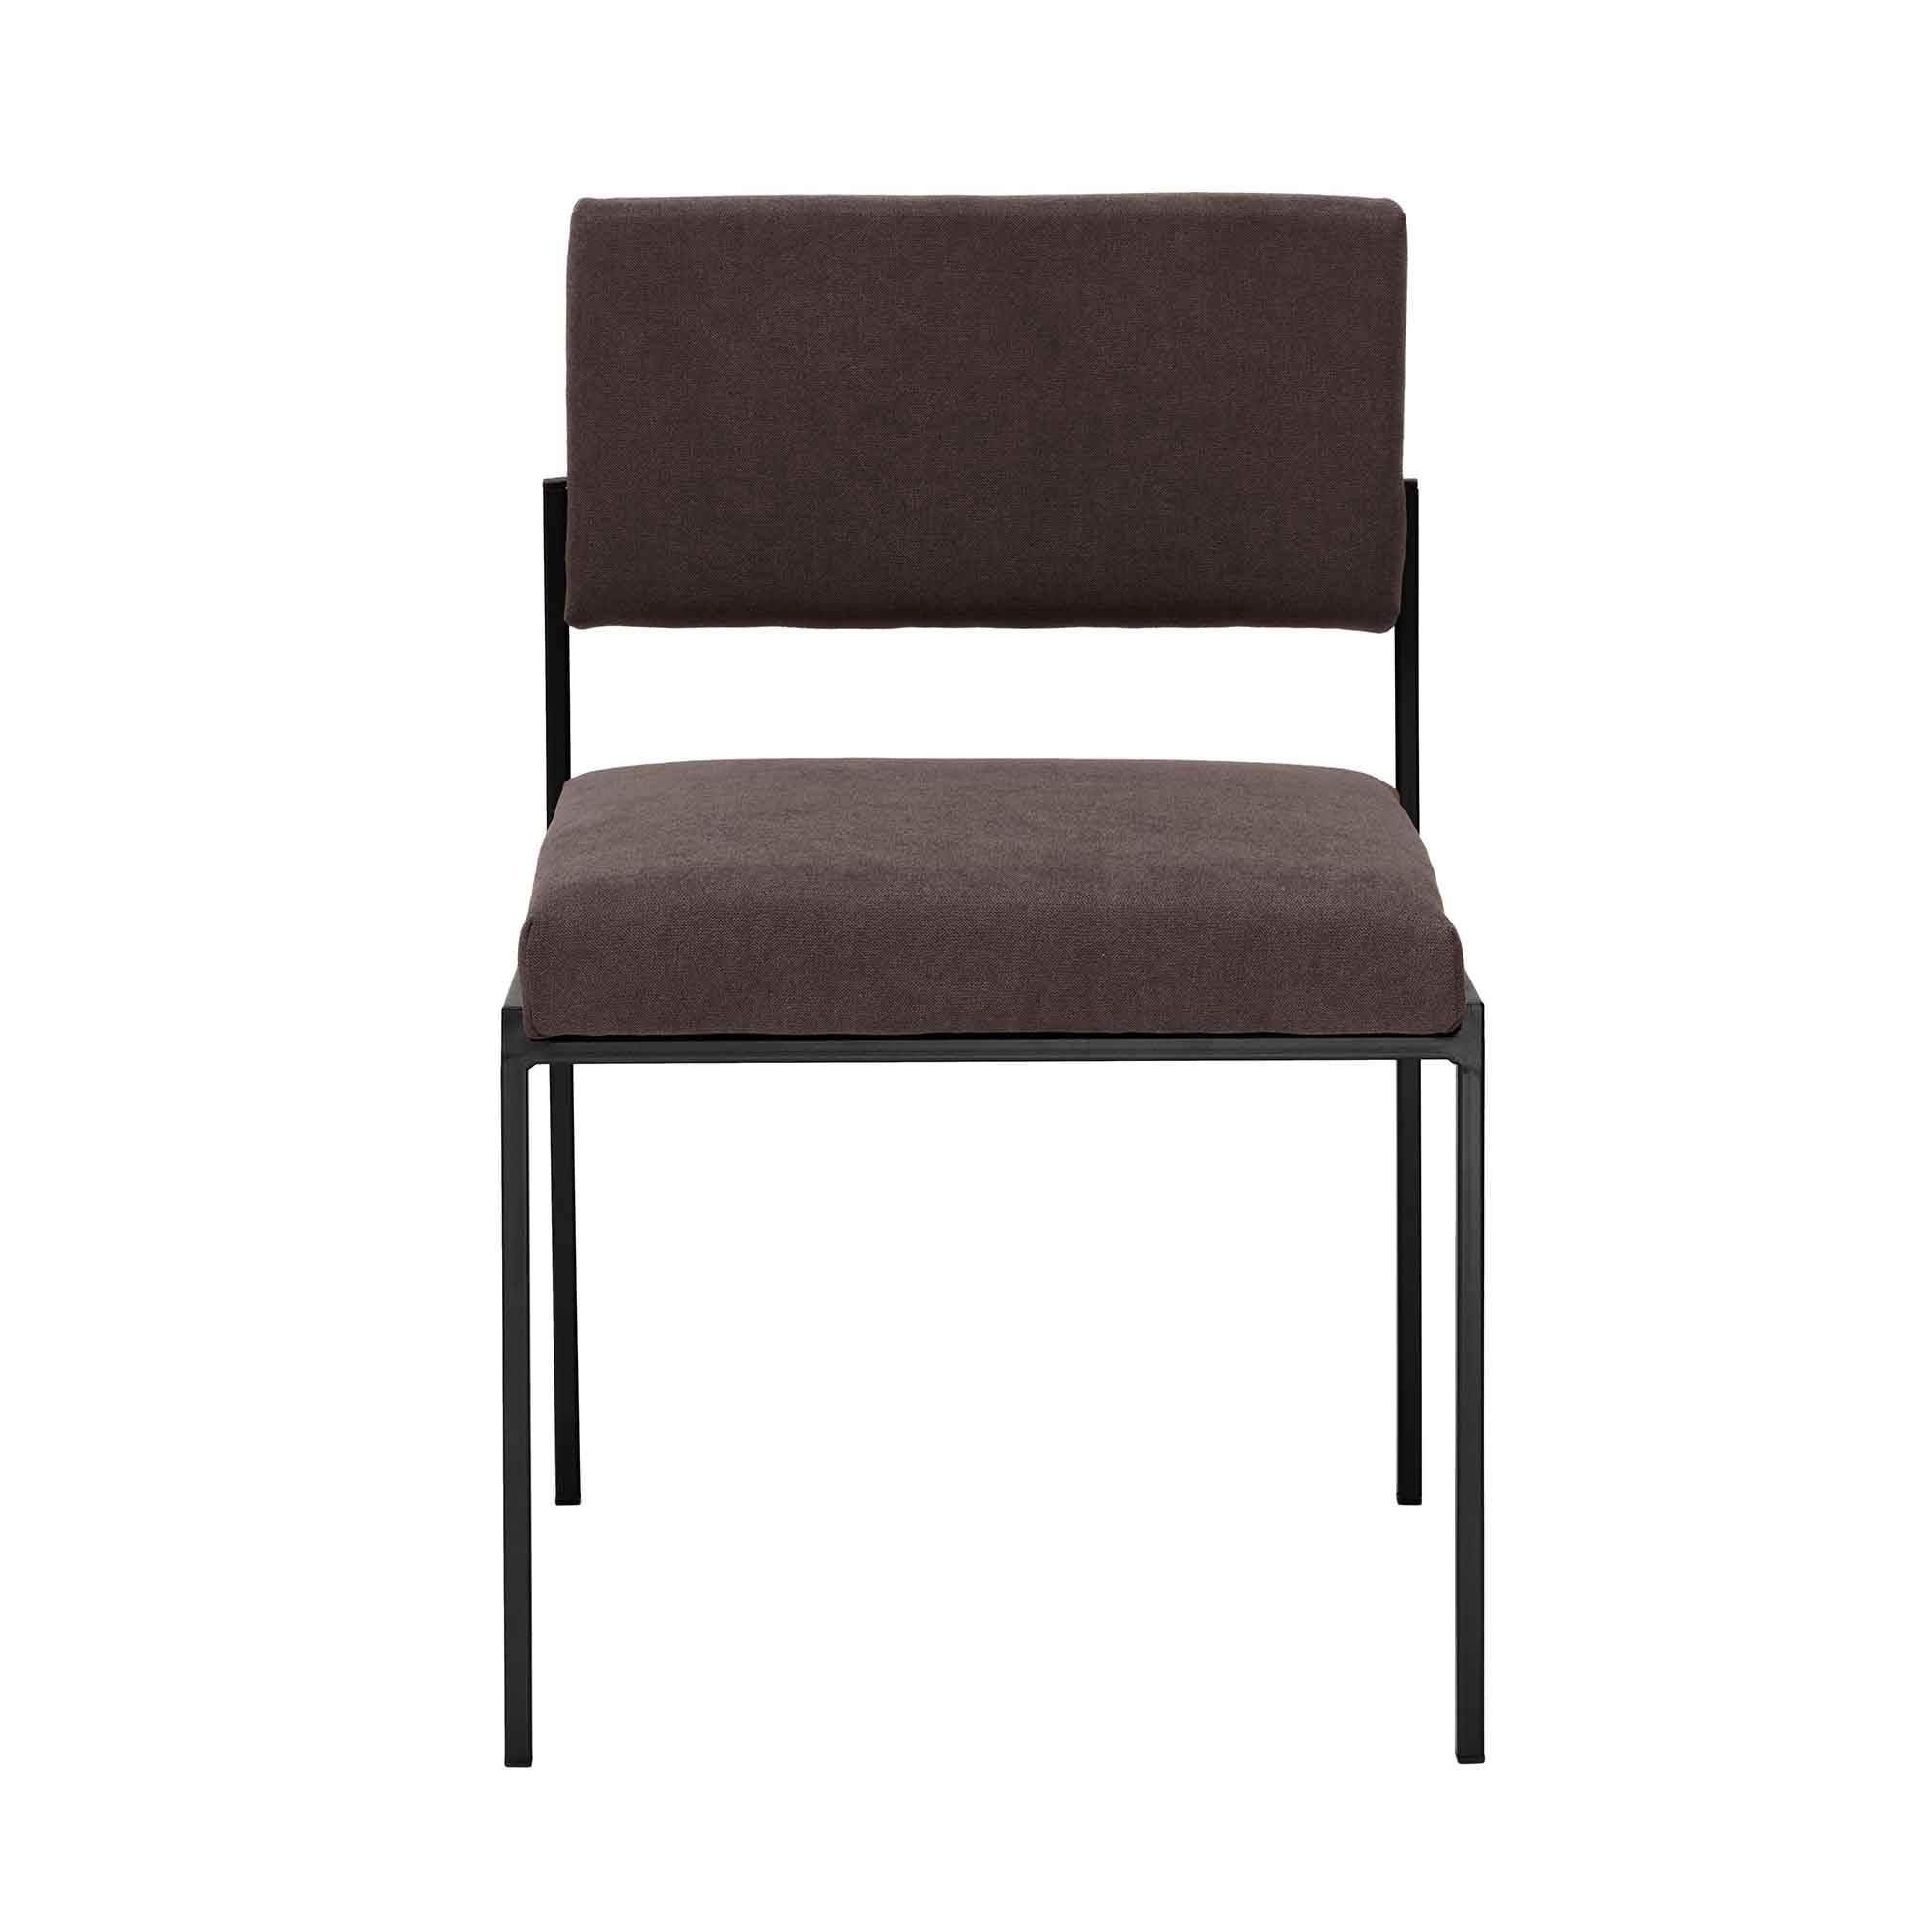  Chair, Powder-Coated Steel Frame brown fabric, black frame, front view